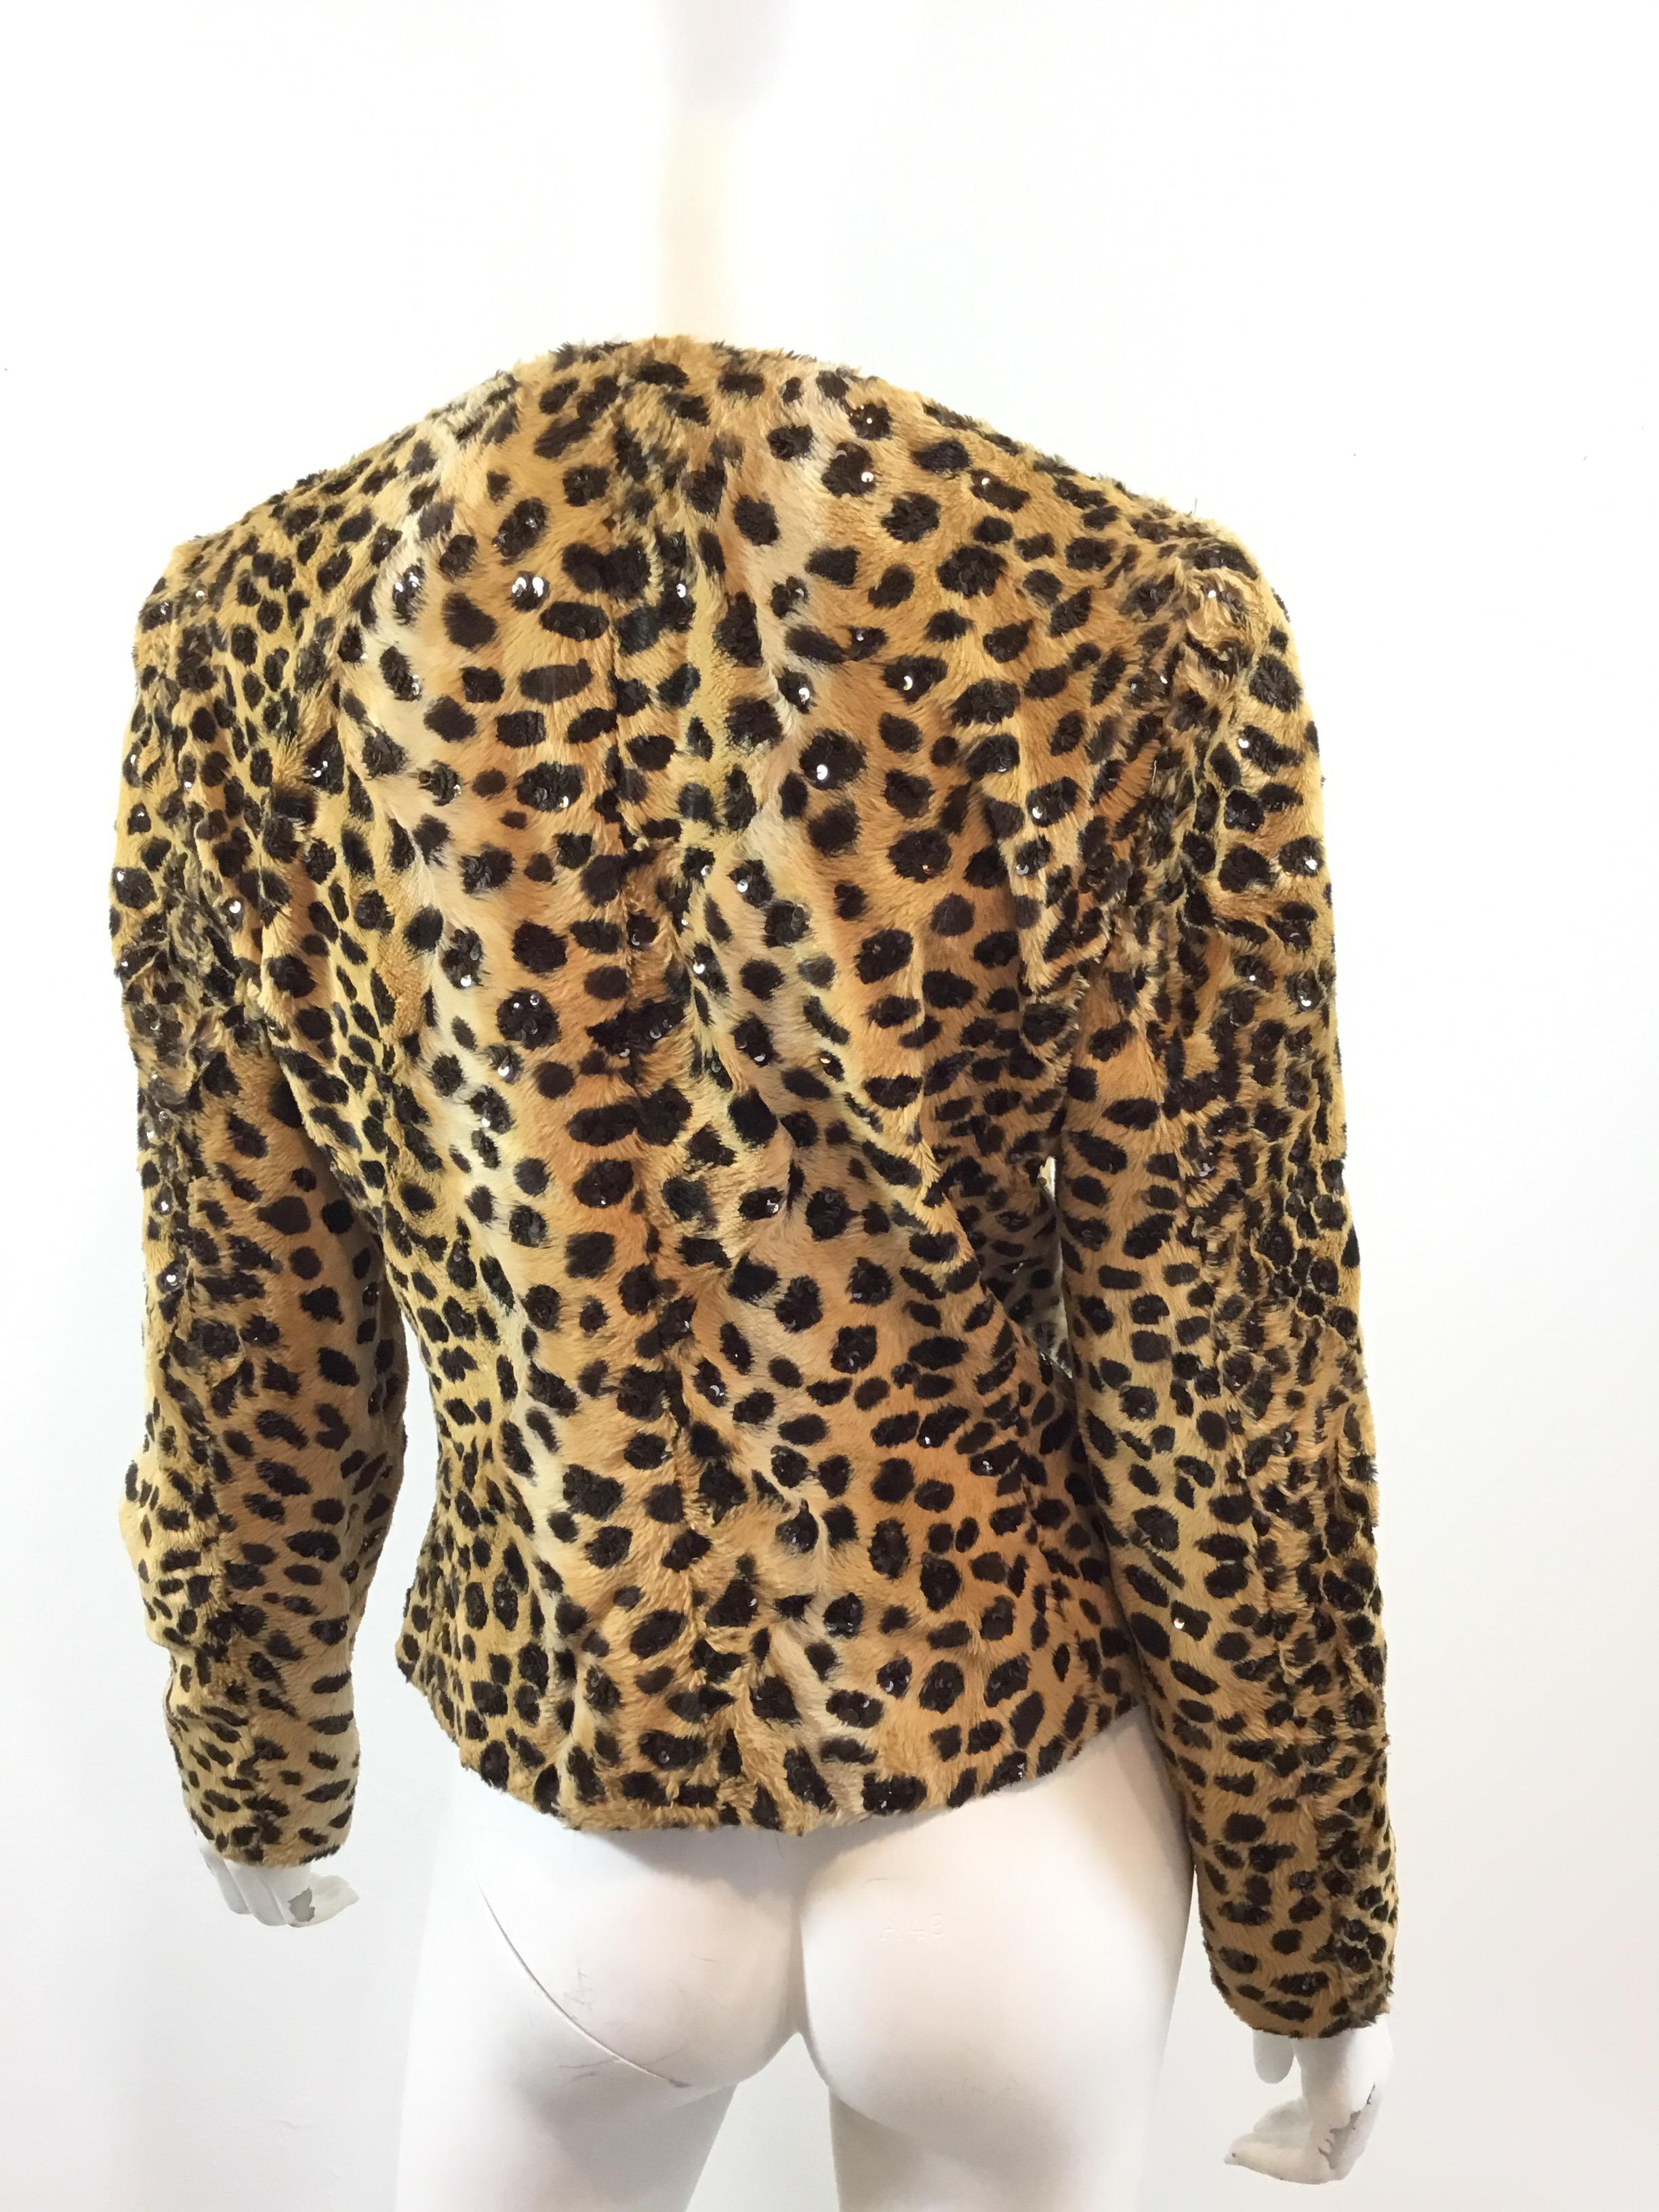 Women's Valentino Leopard Print Jacket with Sequins